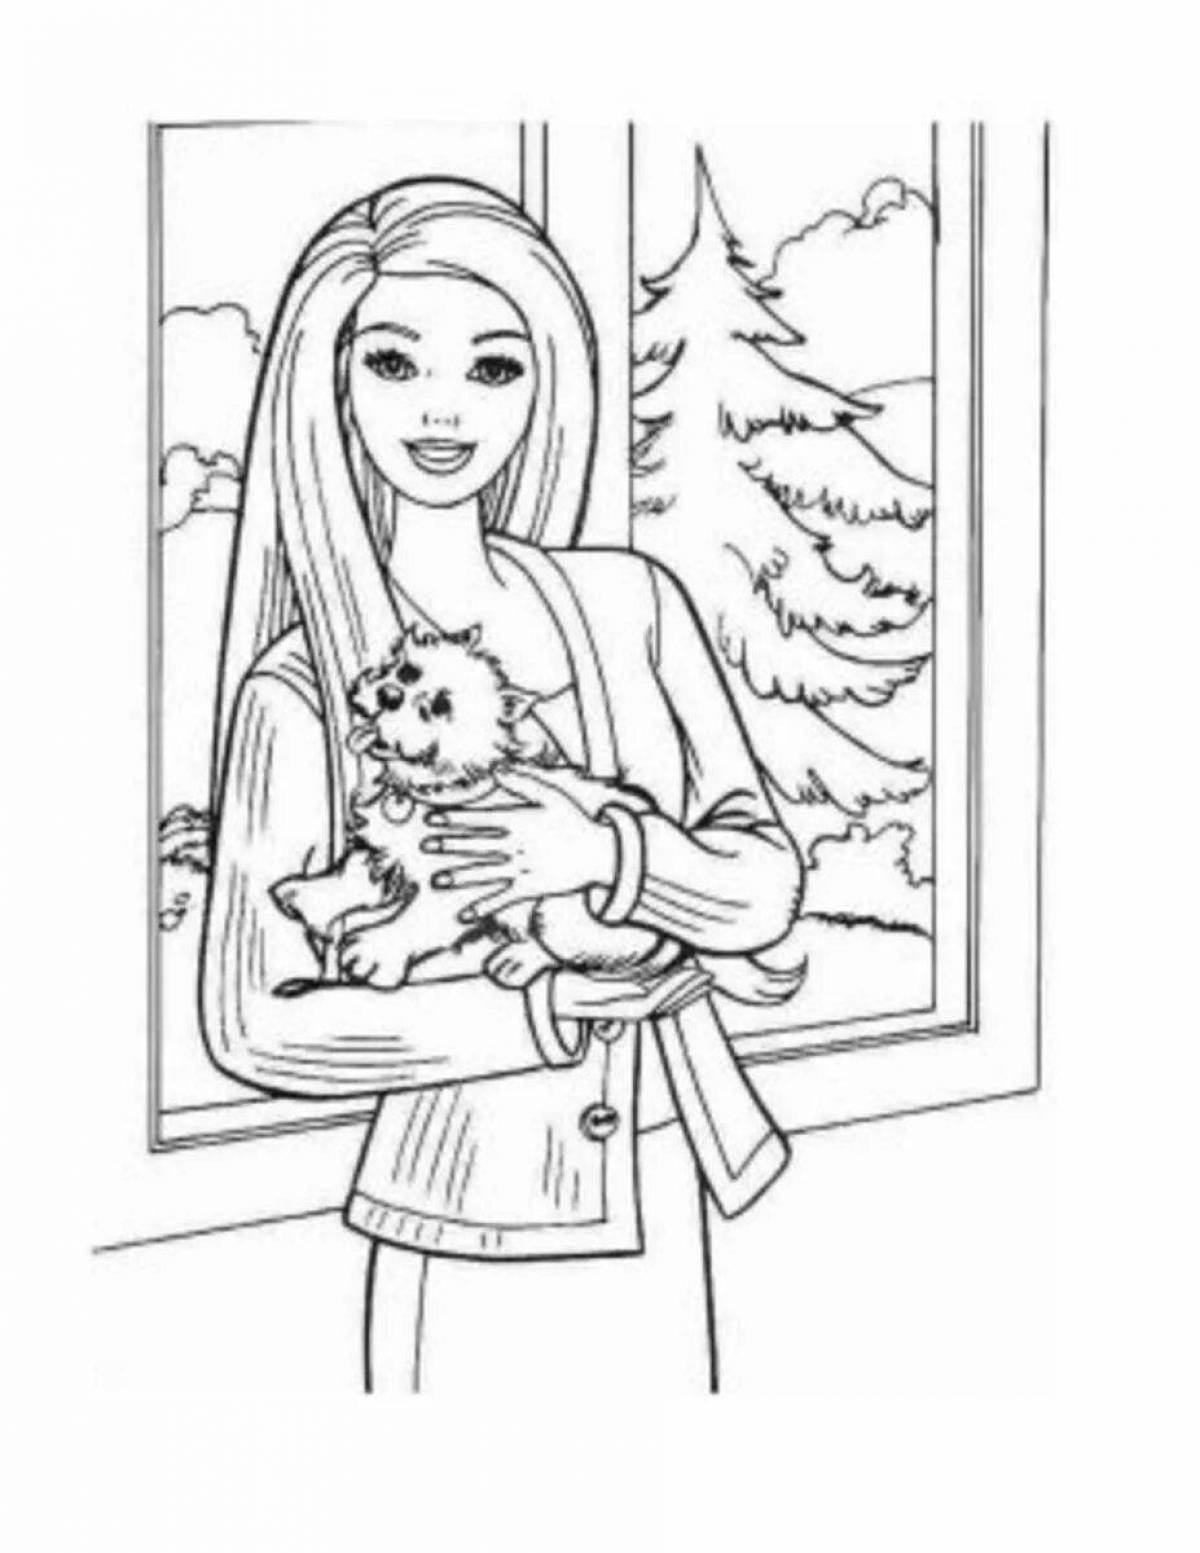 Playful coloring of barbie with a dog